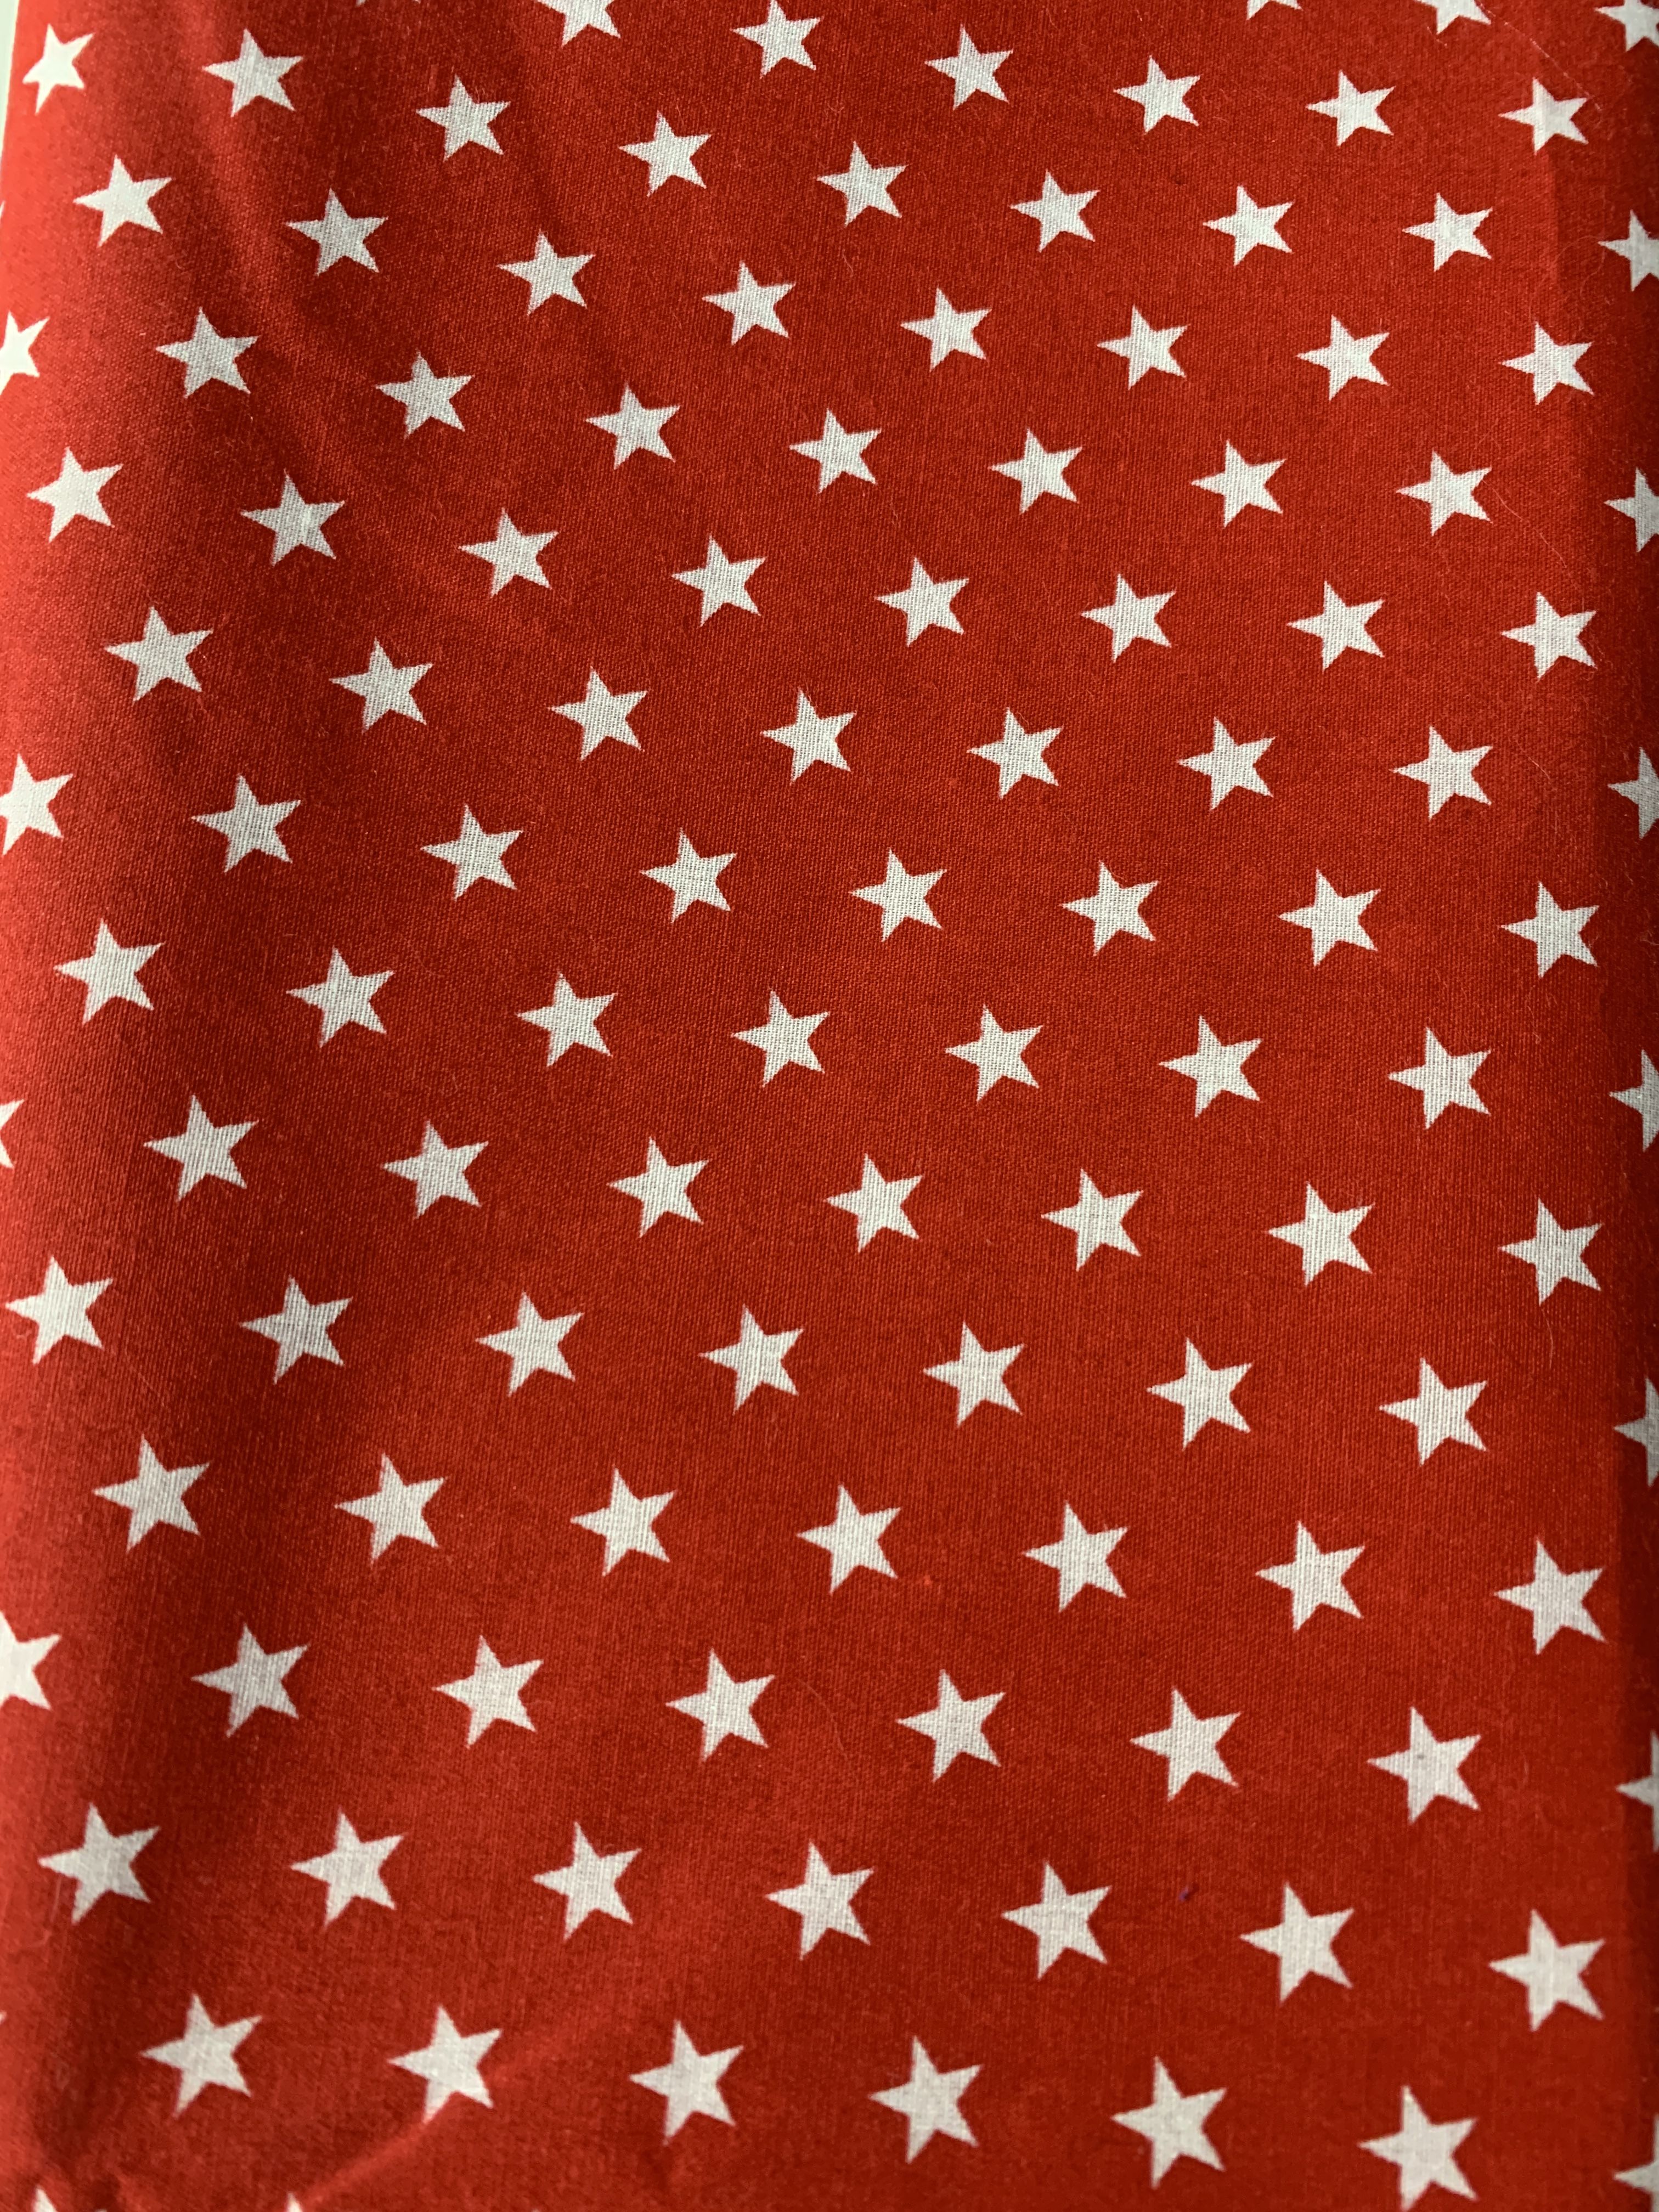 Red star fabric 